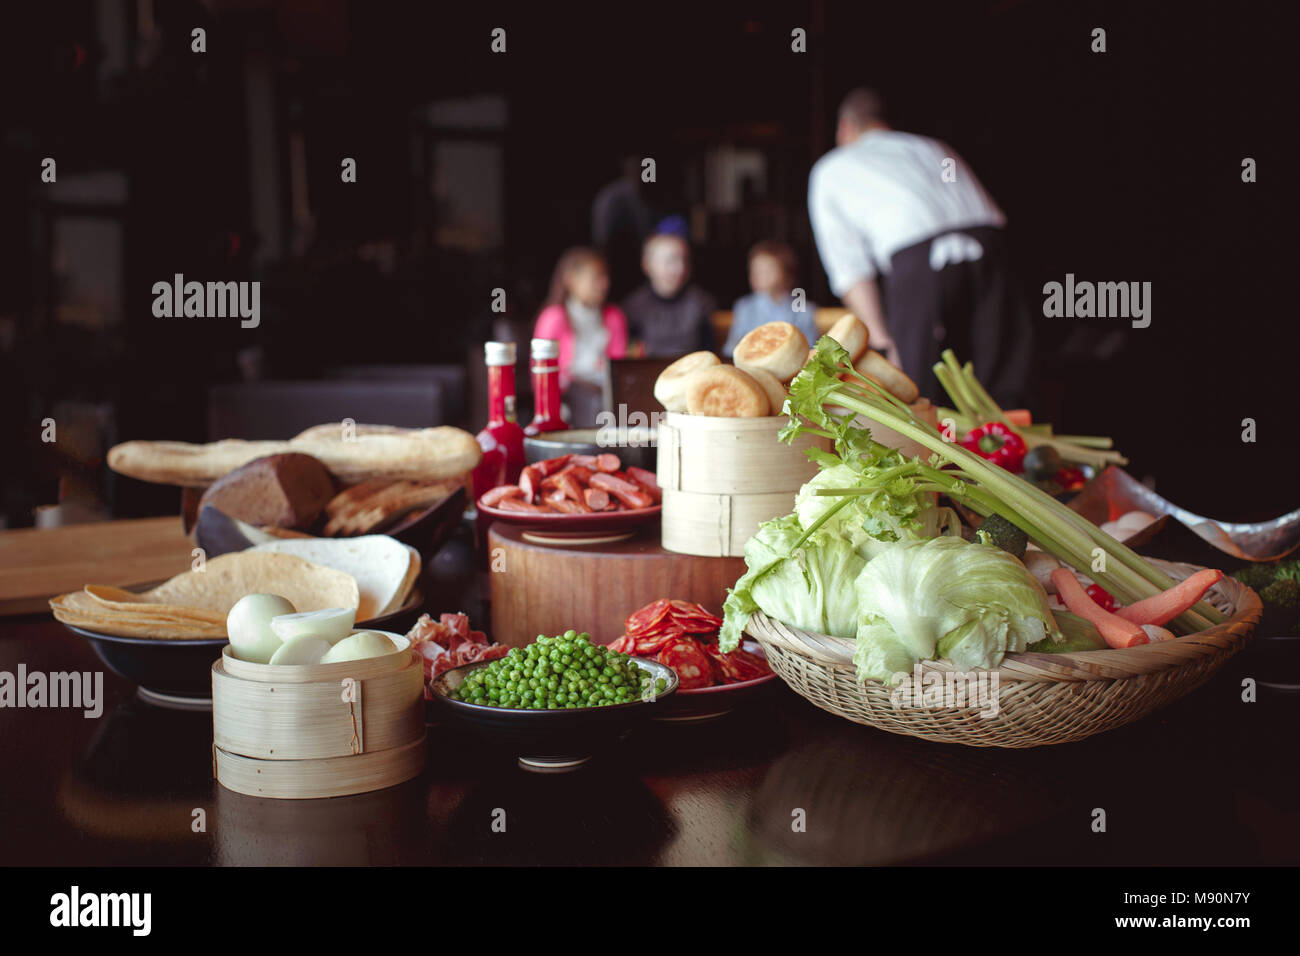 Table with different tasty food Stock Photo